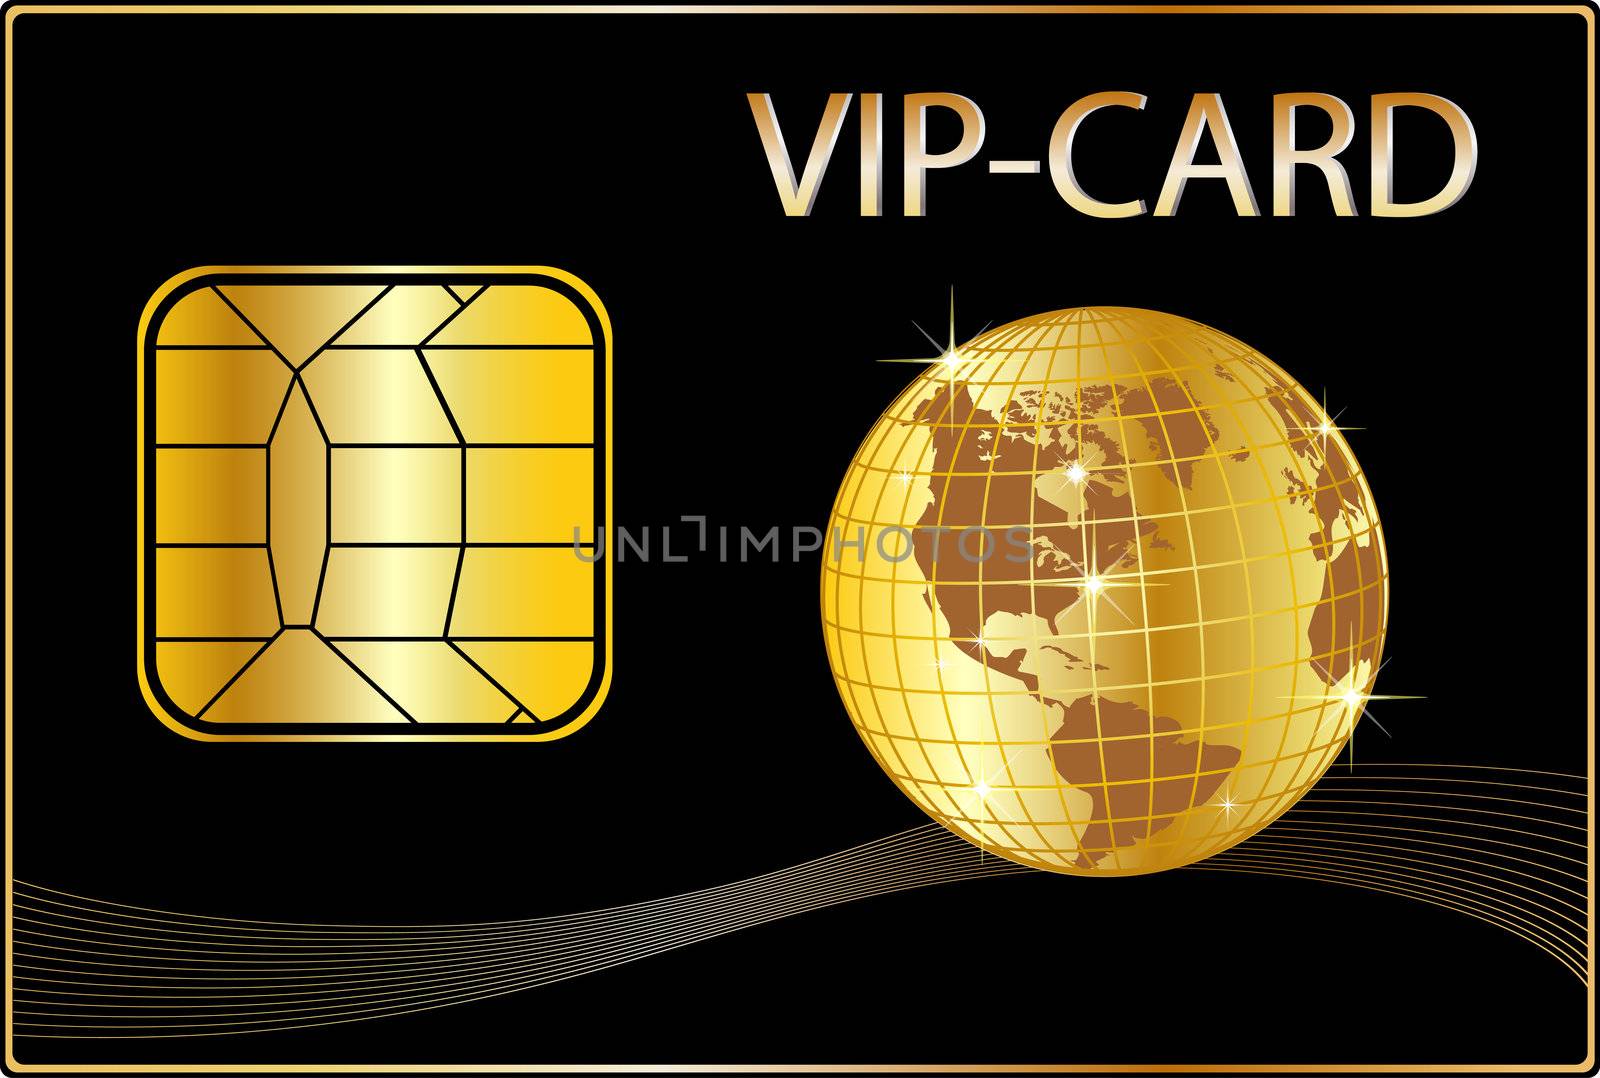 VIP Card with a golden Globe by peromarketing